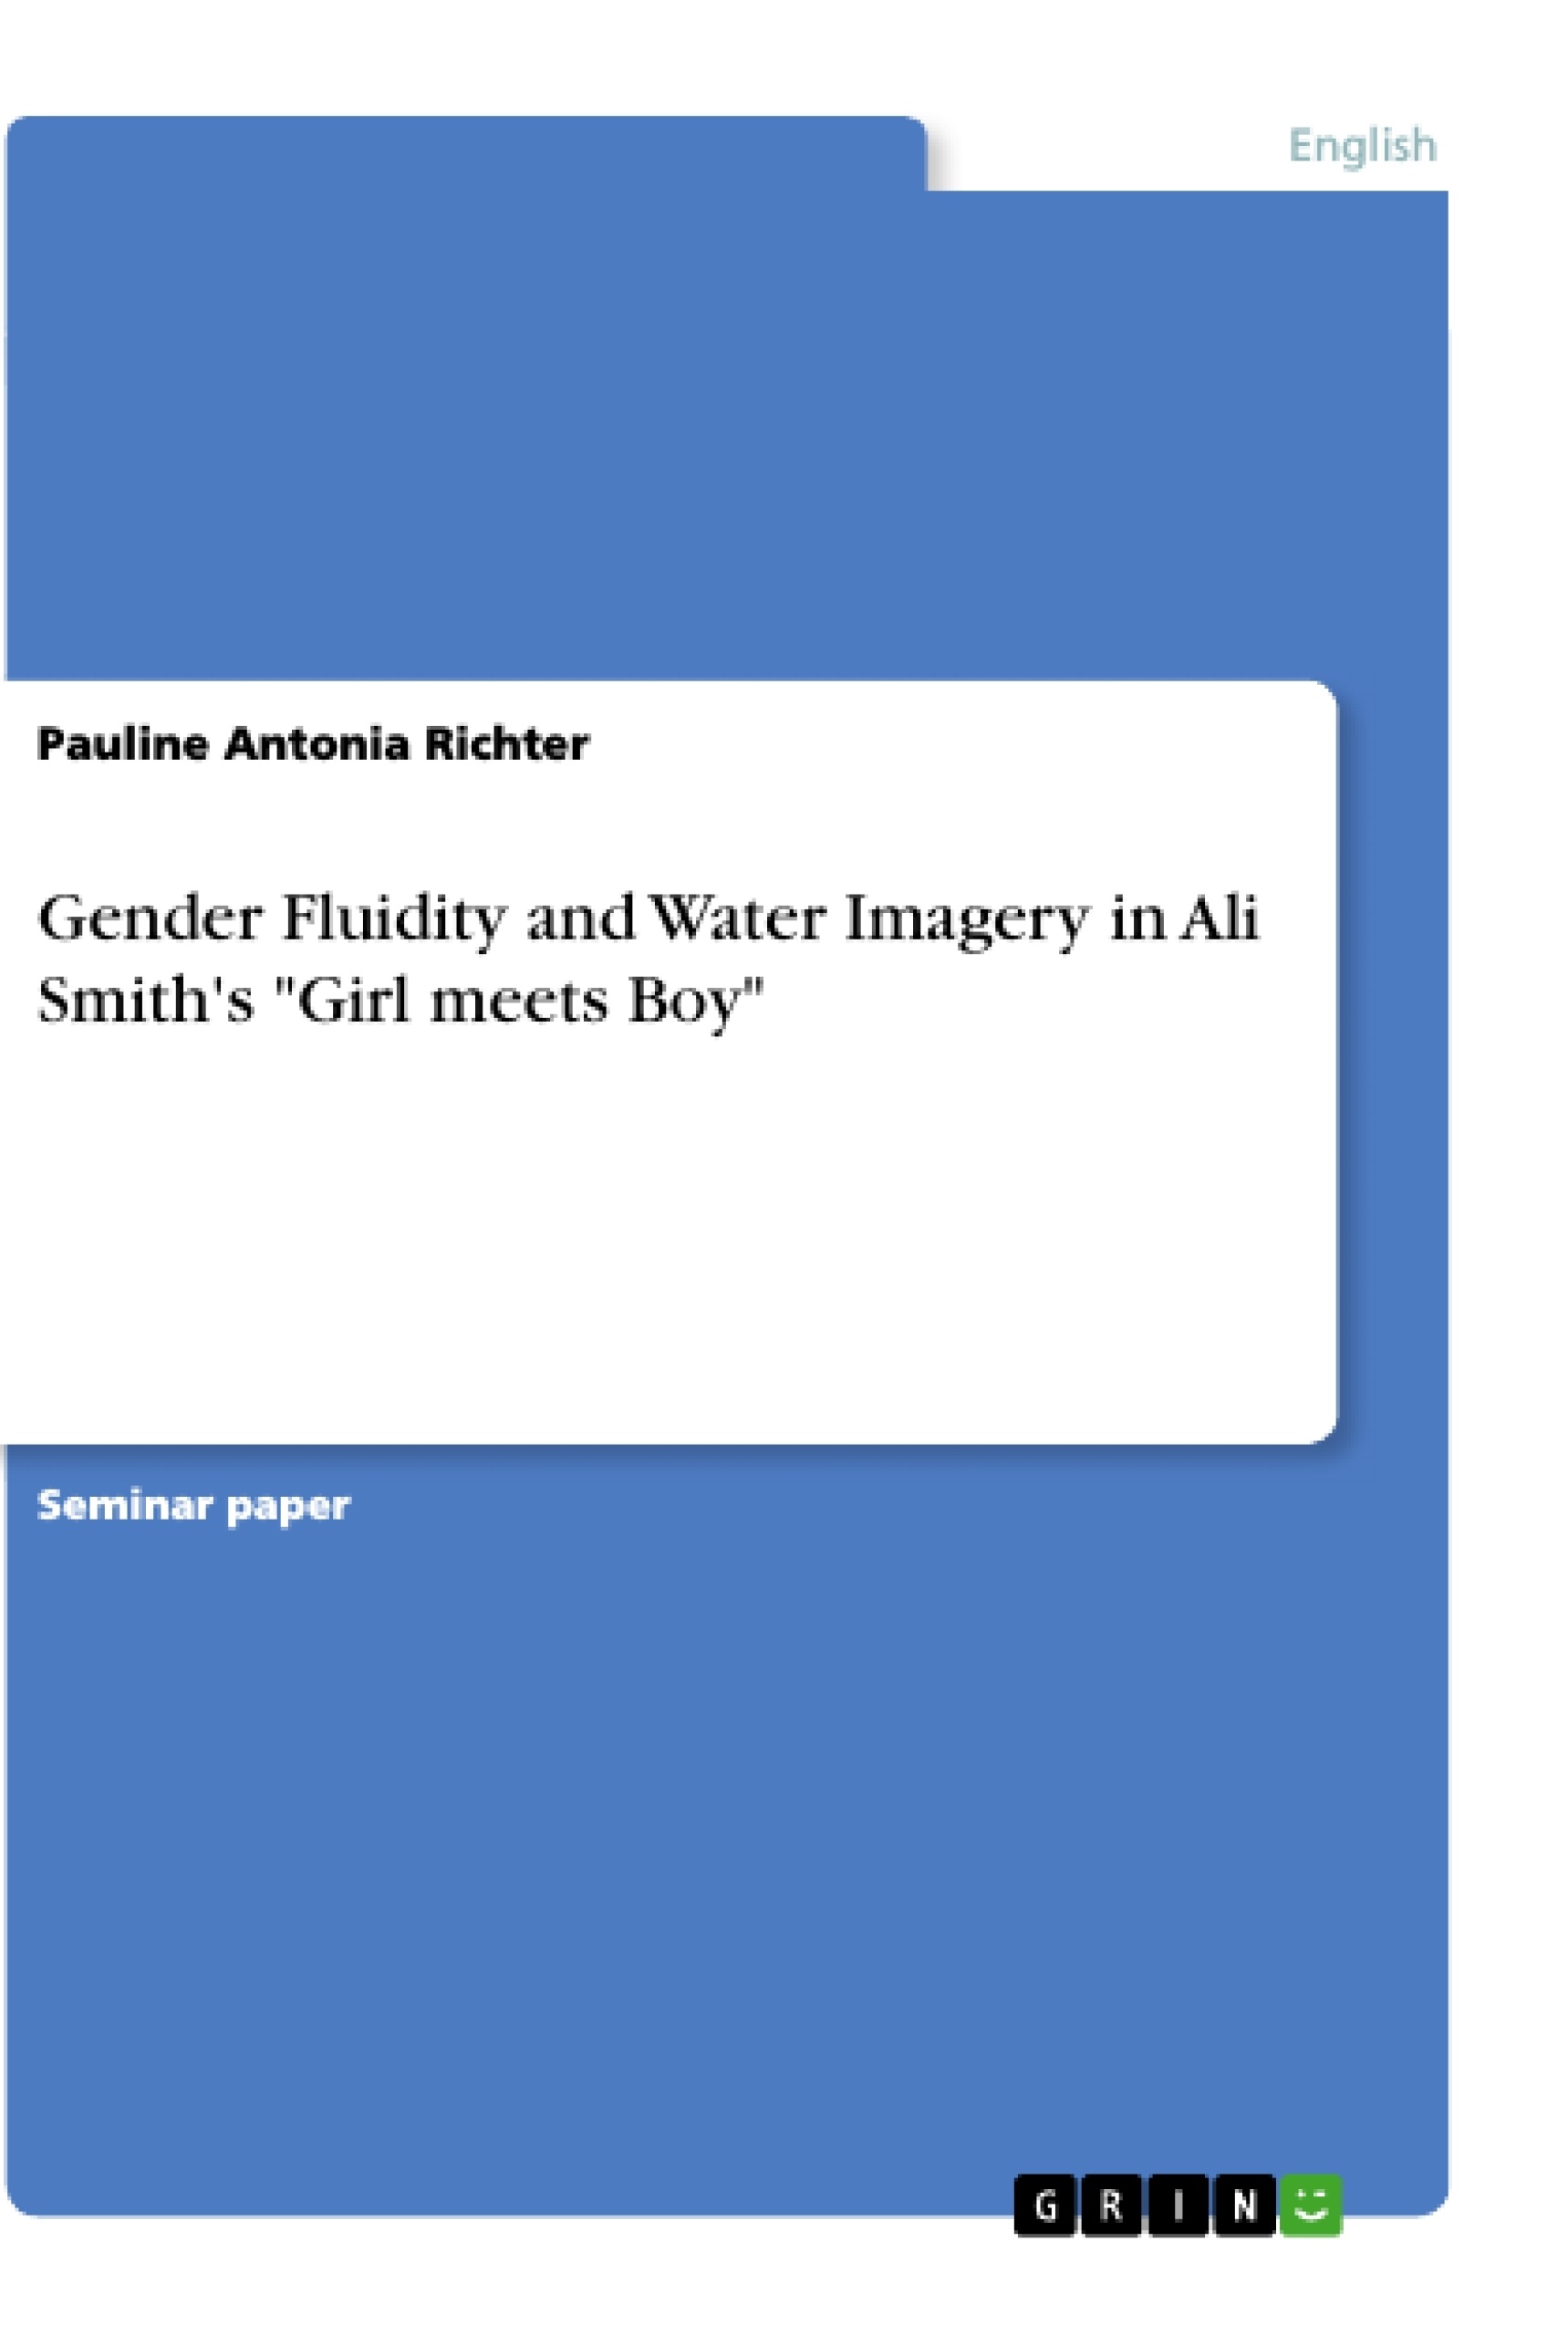 Título: Gender Fluidity and Water Imagery in Ali Smith's "Girl meets Boy"